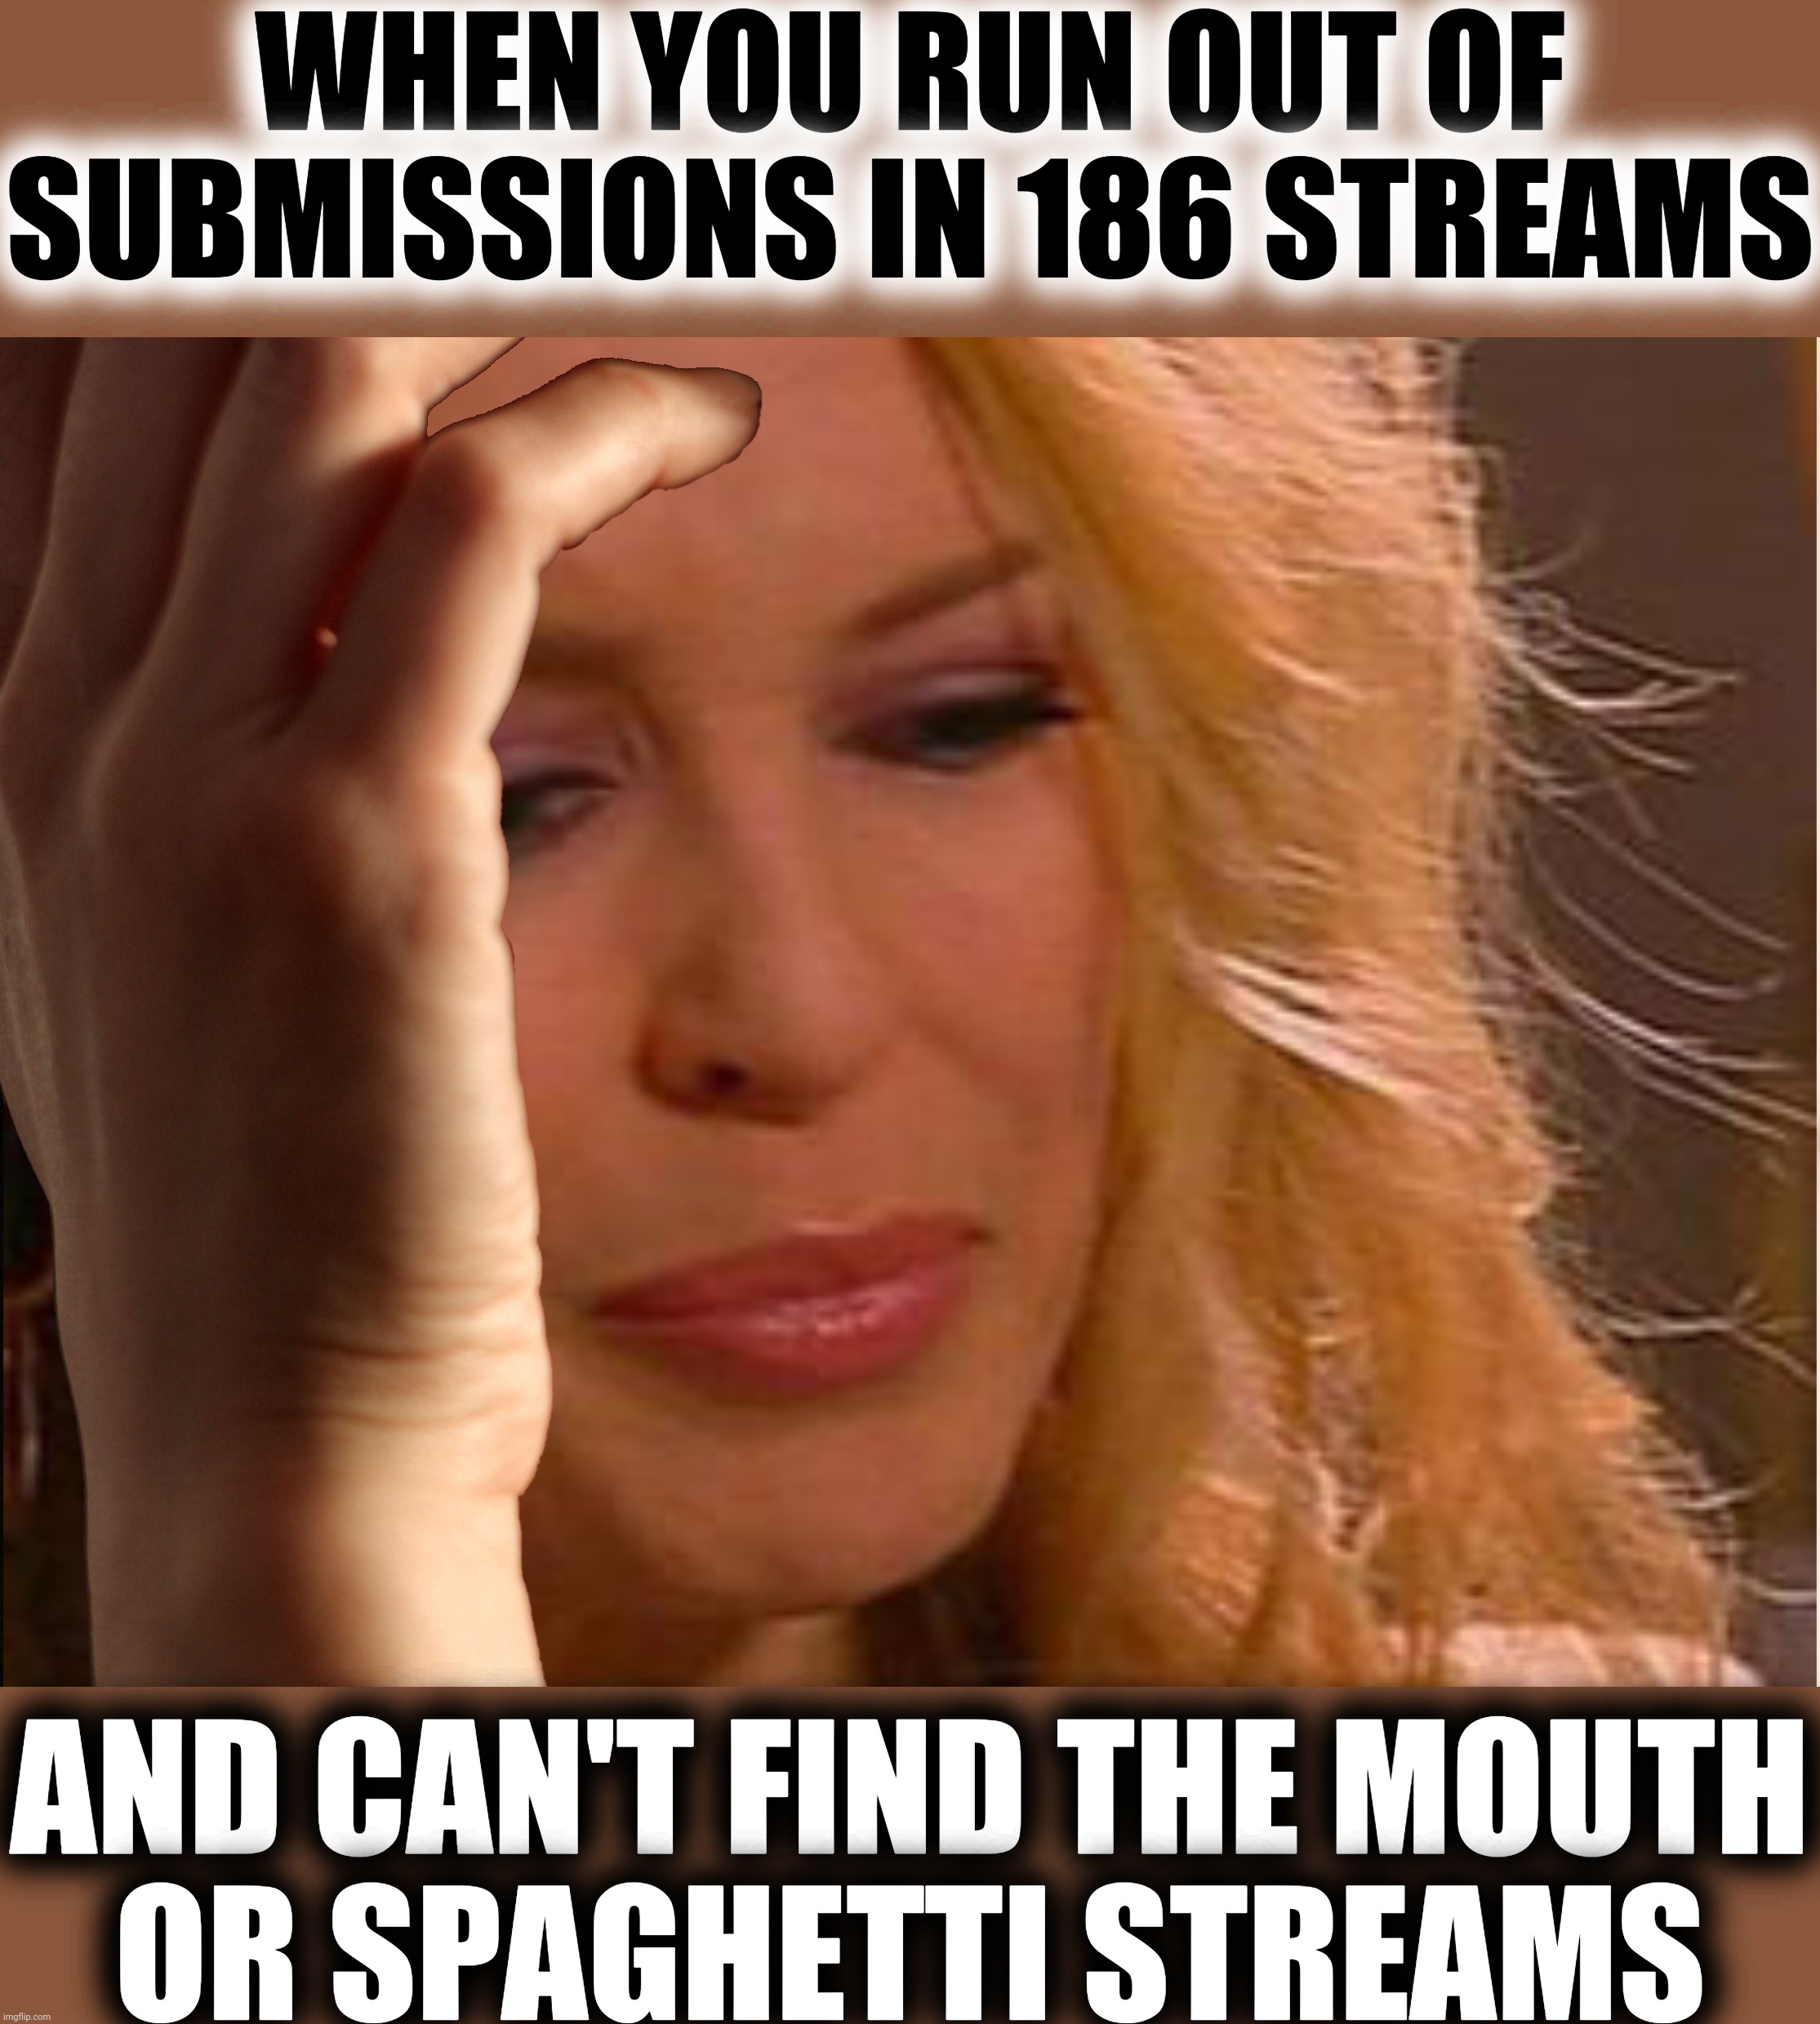 First World Problems - Imgflip Edition | WHEN YOU RUN OUT OF SUBMISSIONS IN 186 STREAMS AND CAN'T FIND THE MOUTH
OR SPAGHETTI STREAMS | image tagged in first world problems kylie,too many,streams,meanwhile on imgflip,imgflip humor,kylieminoguesucks | made w/ Imgflip meme maker